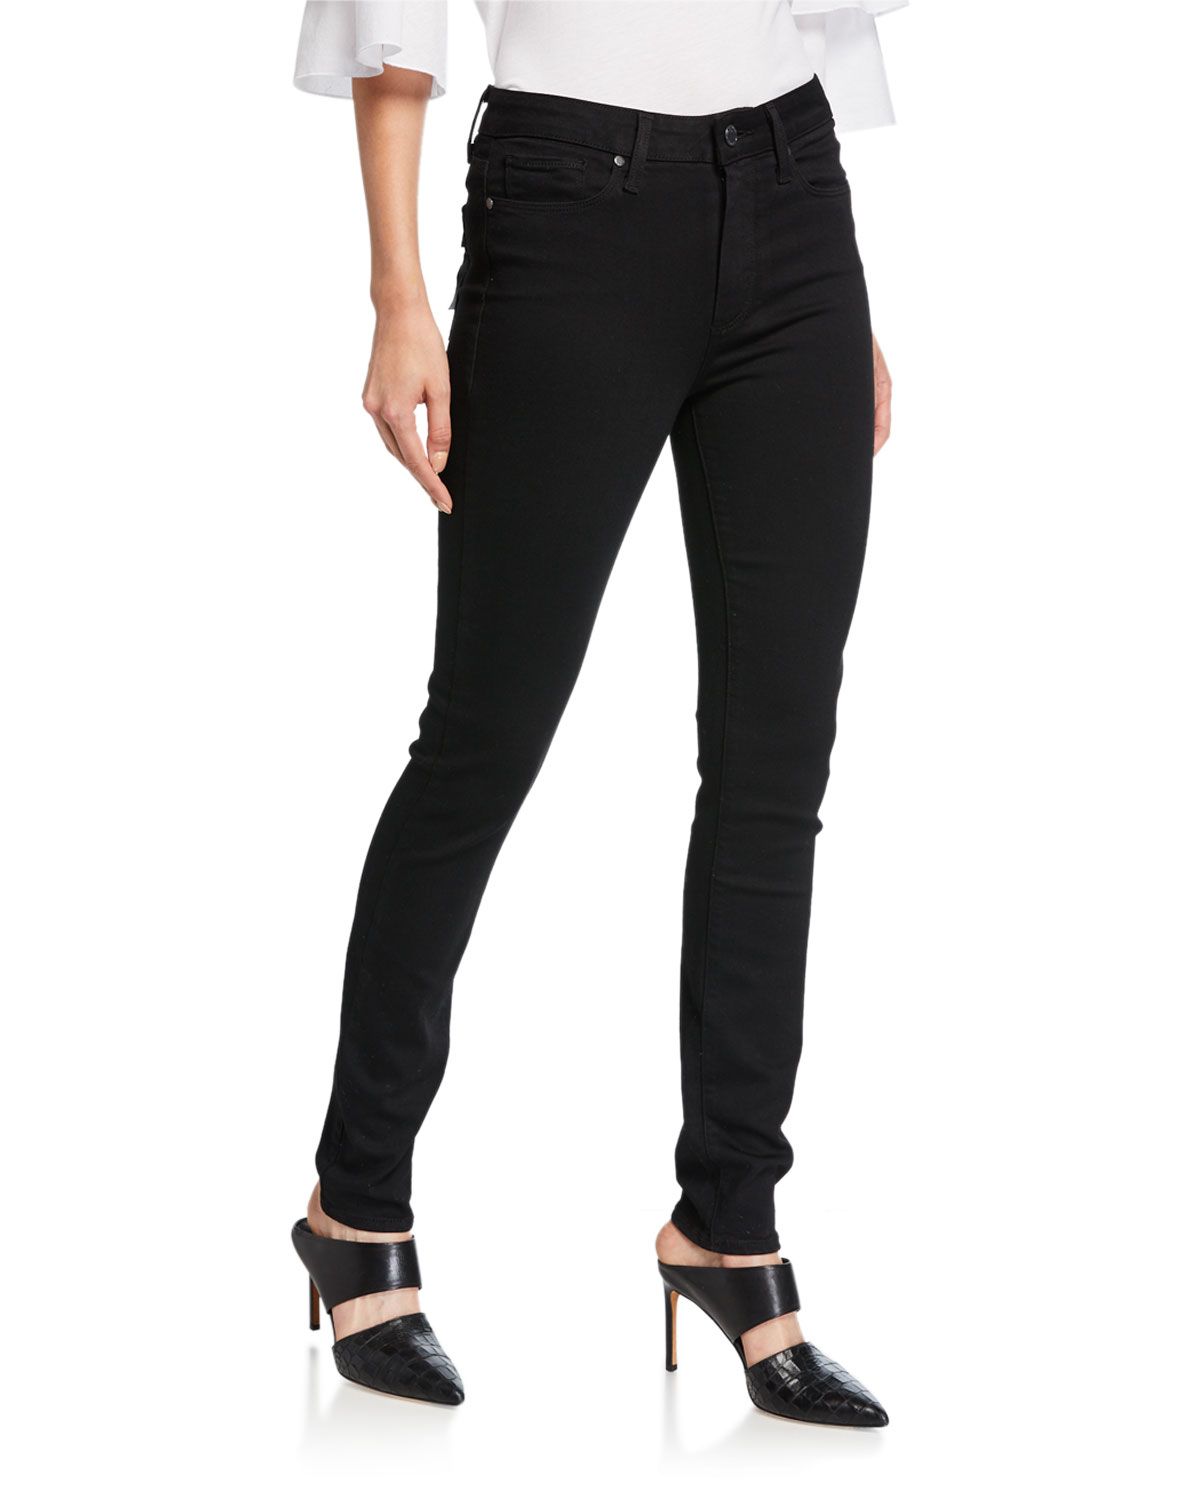 Hoxton Ultra-Skinny Ankle Jeans, Black Shadow | Neiman Marcus